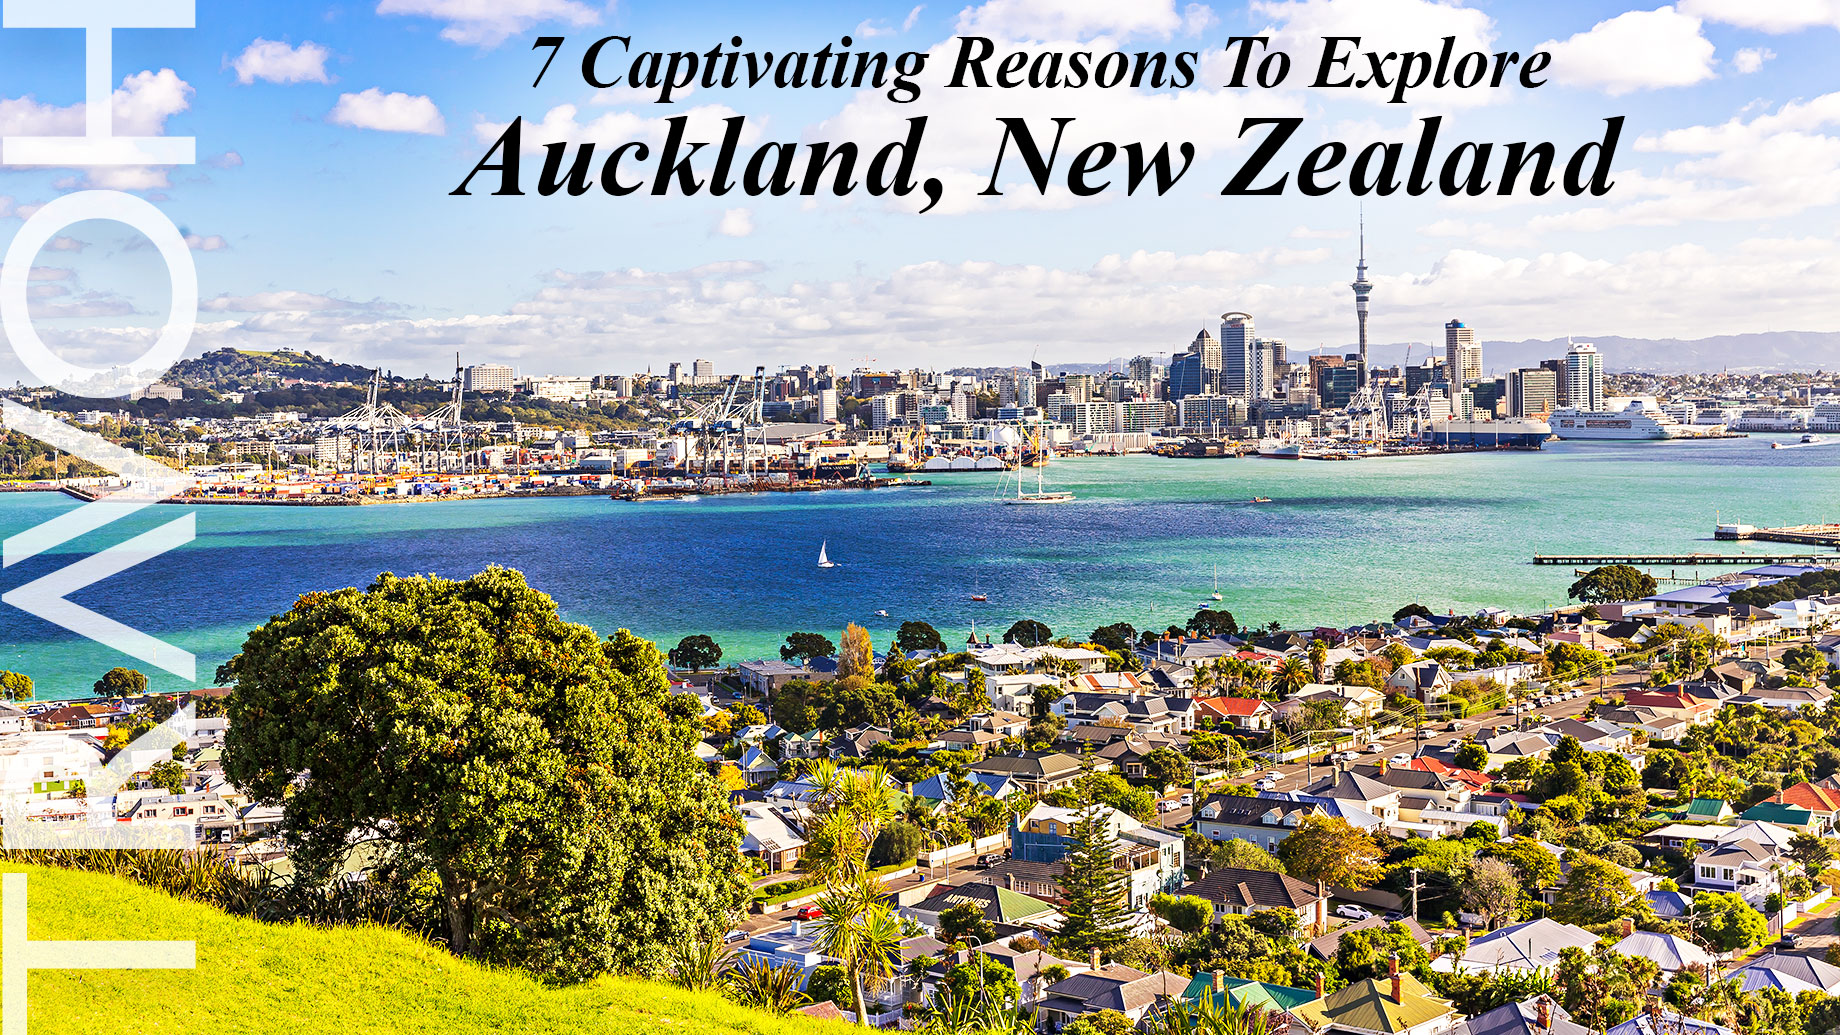 7 Captivating Reasons To Explore Auckland, New Zealand